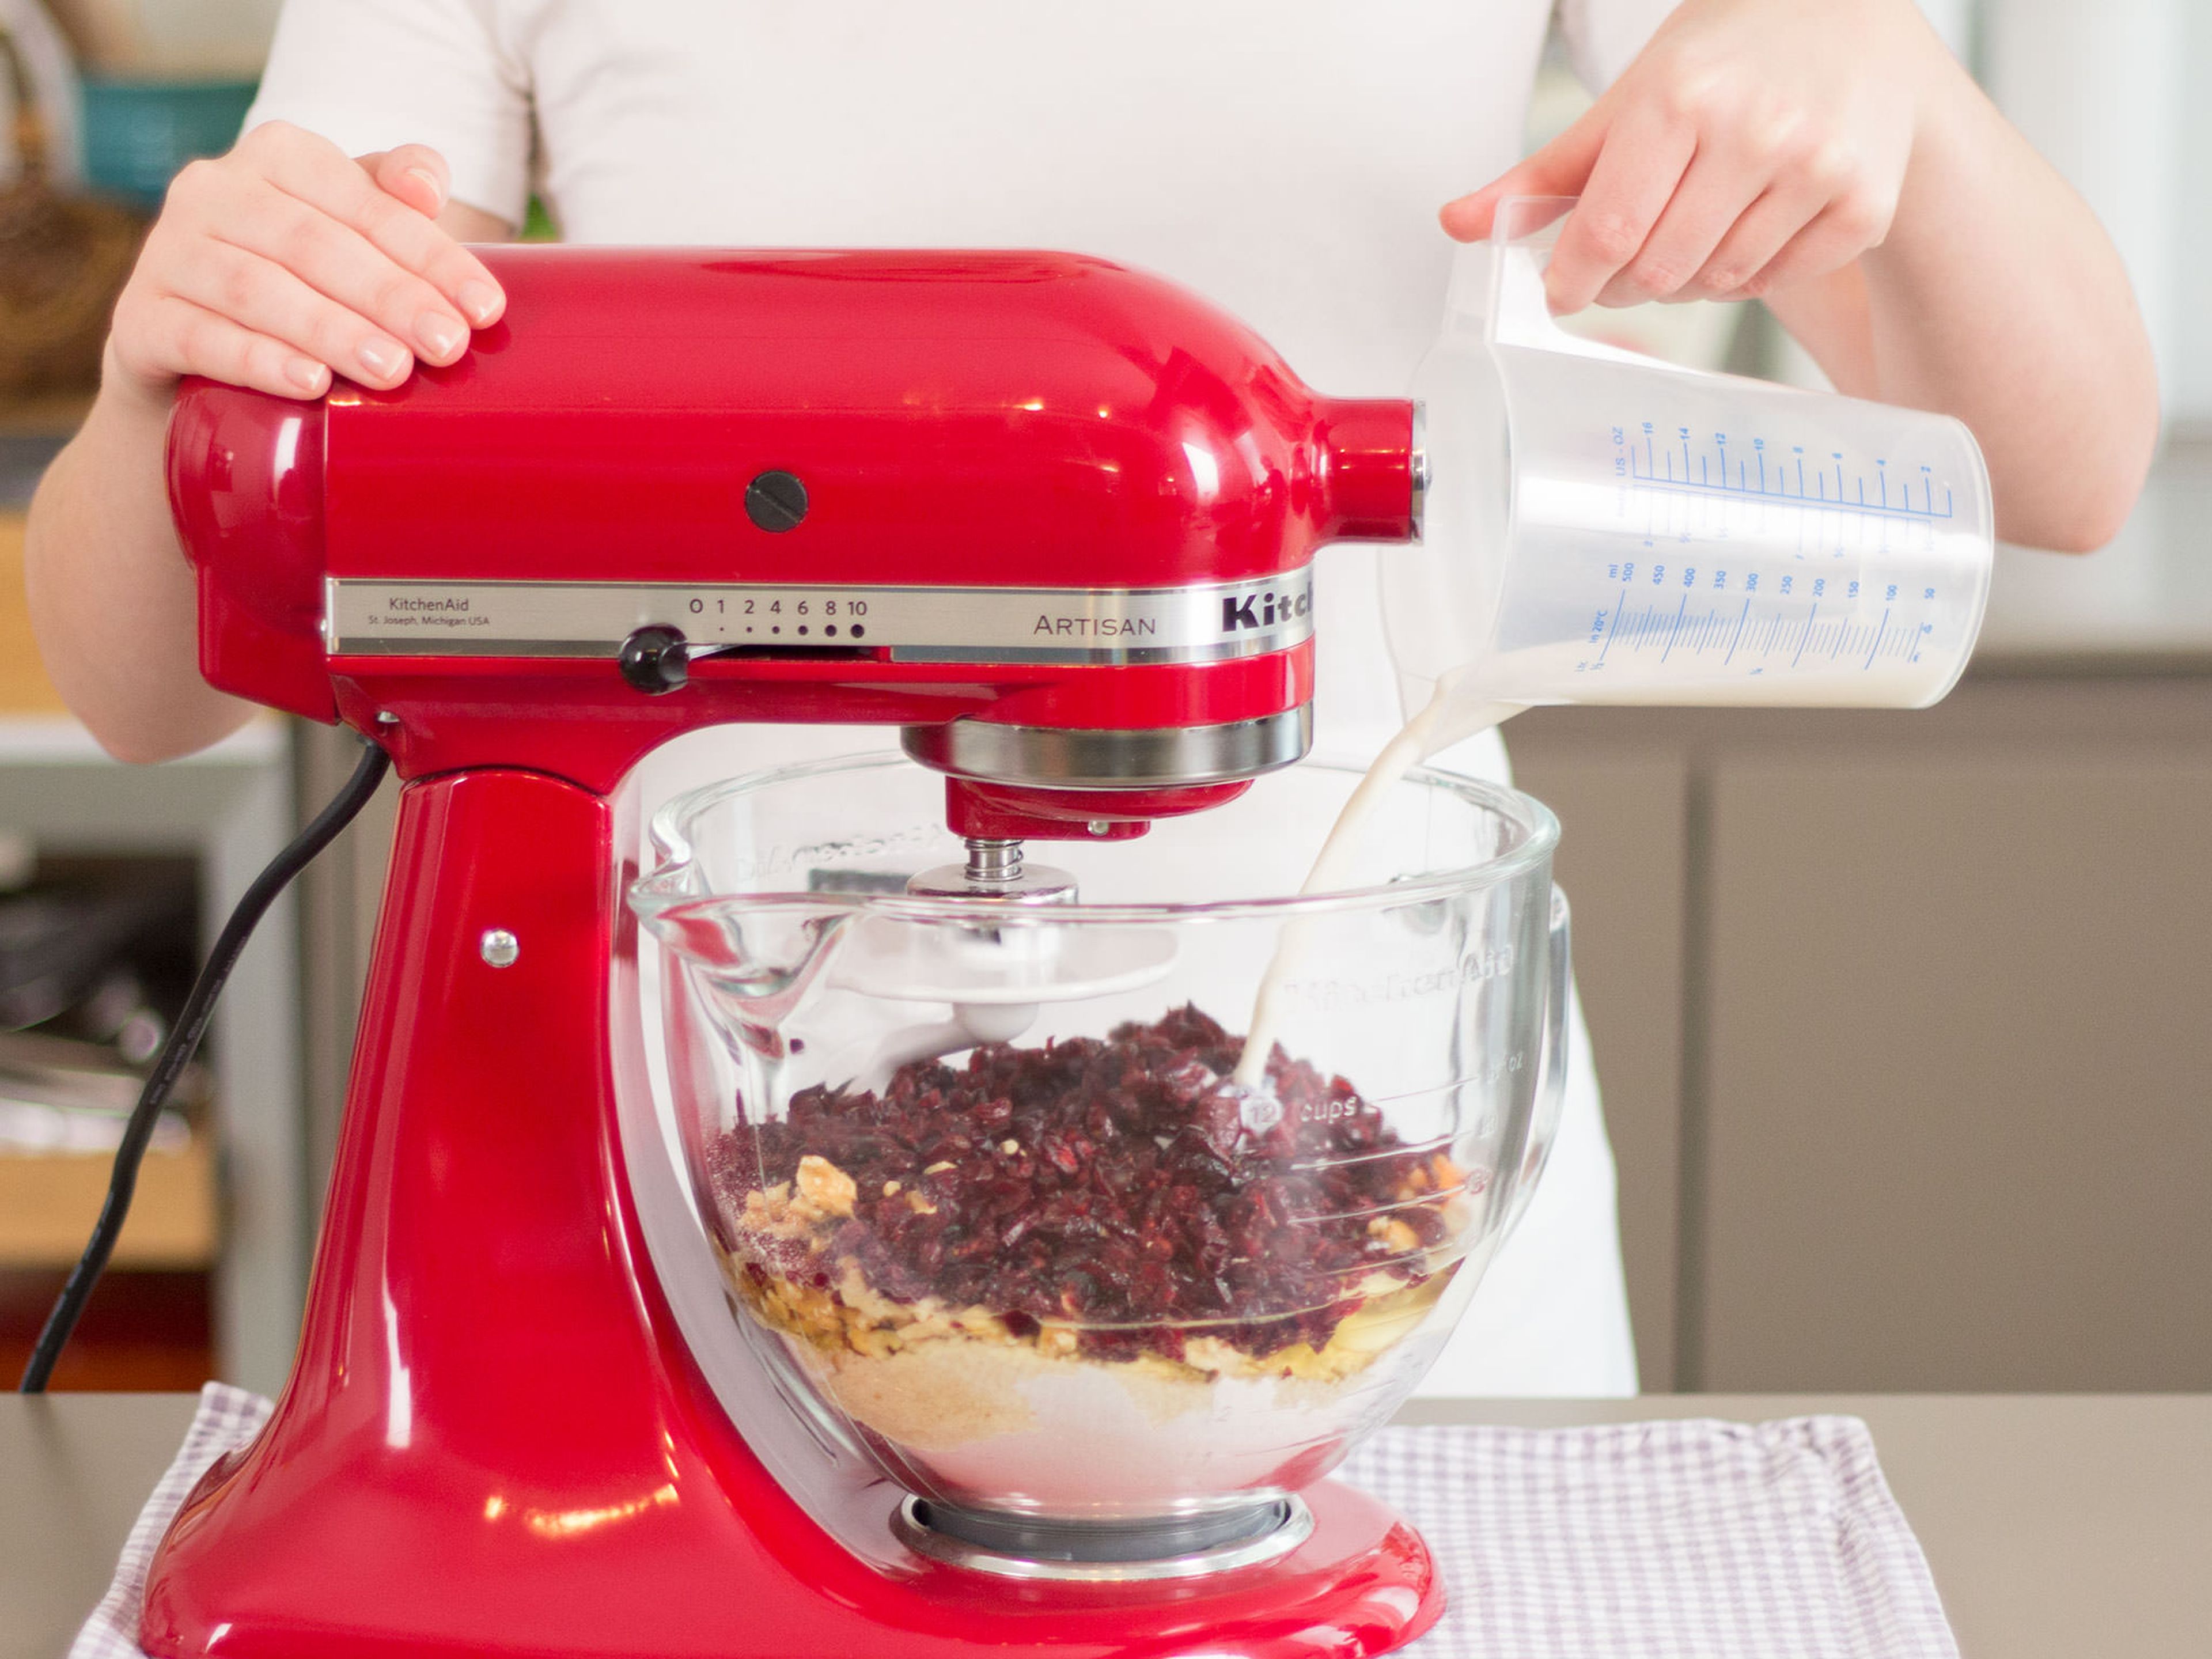 Add flour, baking powder, walnuts, cranberries, yogurt, eggs, salt, and milk to a stand mixer. Beat for approx. 2 – 3 min. until a smooth dough forms.